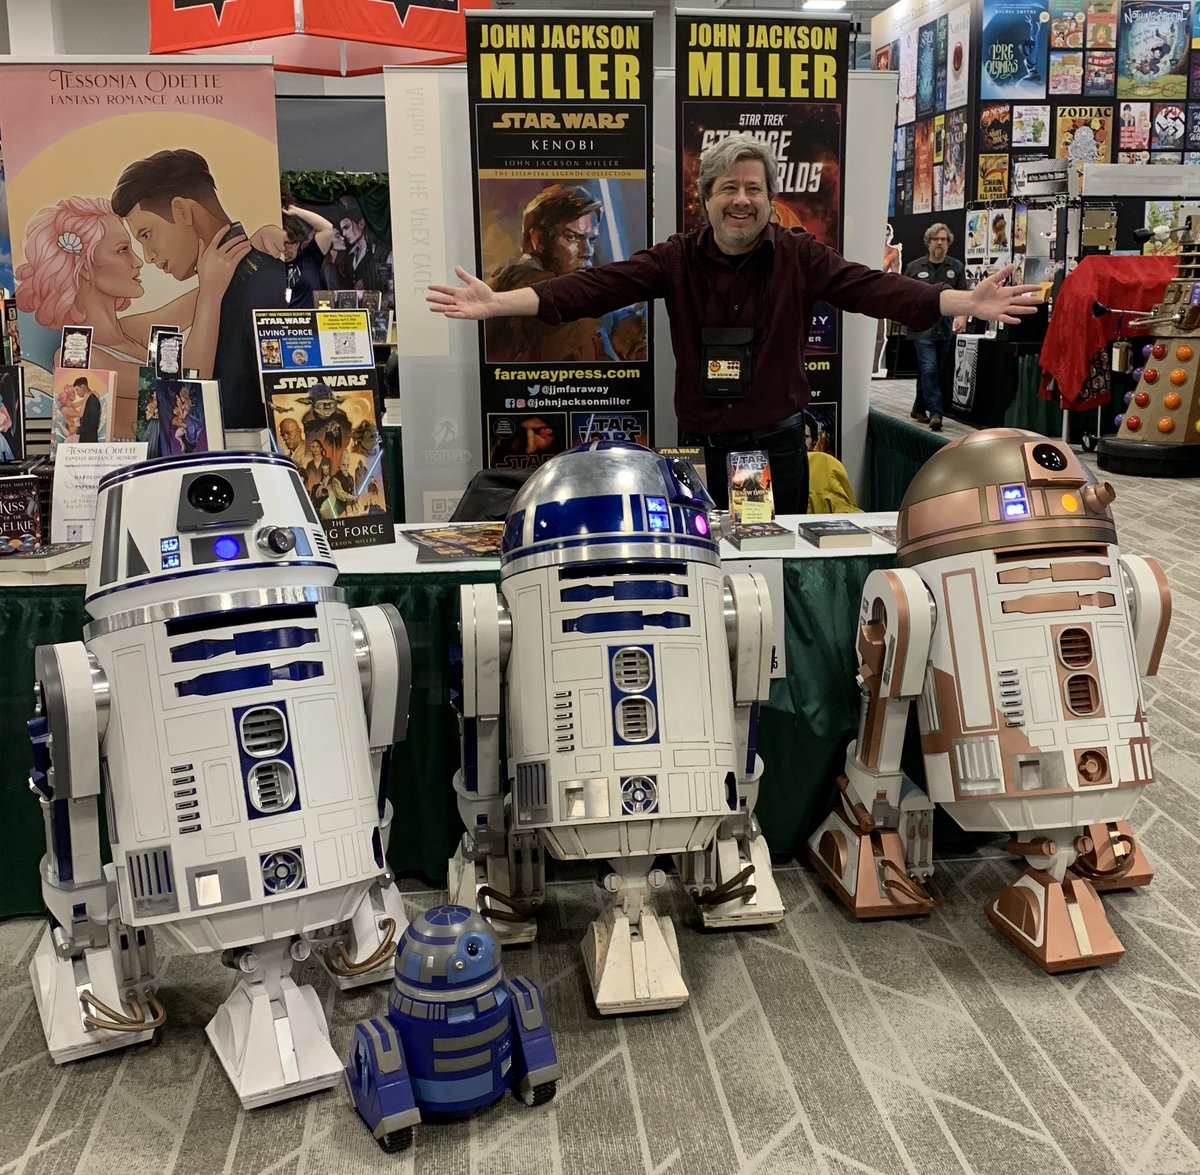 Not sure why, but my first visitors at @emeraldcitycon today wanted to know if THE LIVING FORCE would be available from @StarWarsByRHW in the binary language of moisture vaporators. (Also, note the Dalek hiding around the corner!) #starwars